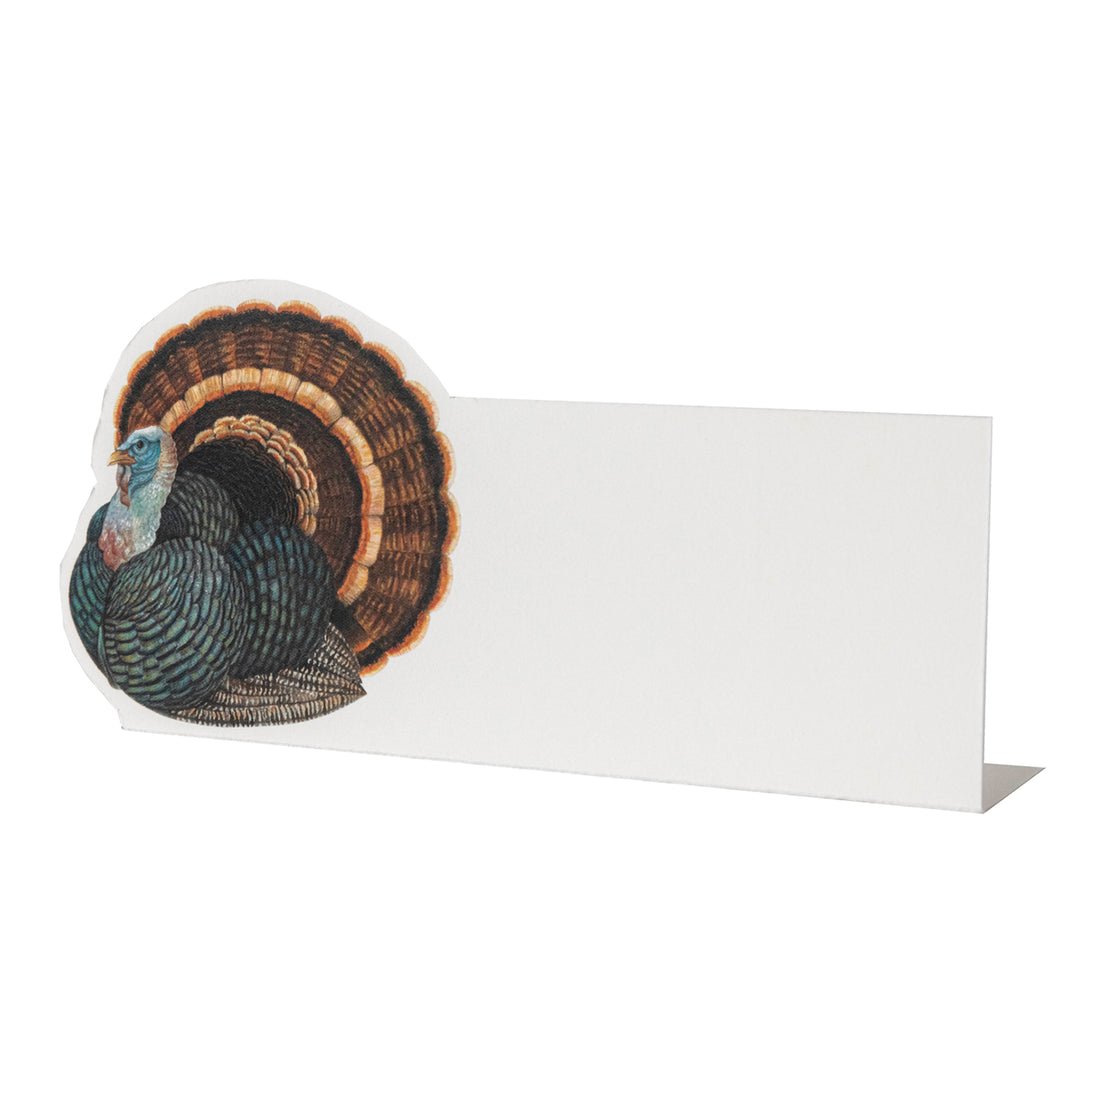 A white, rectangle freestanding place card featuring a plump turkey adorning the left side.